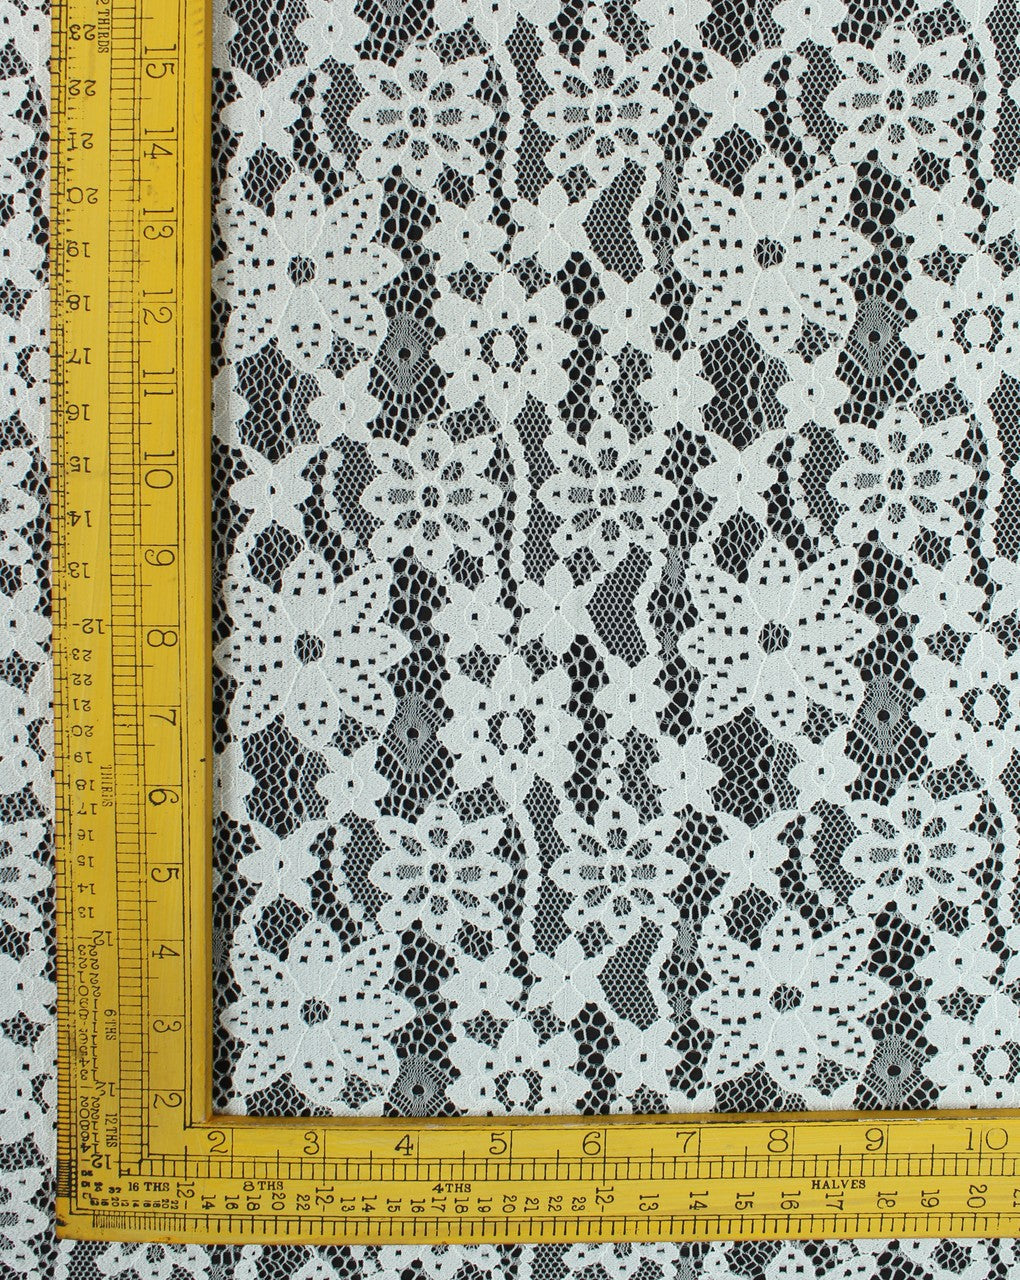 Polyester Floral Design 5 Lace Cut Work Fabric (RFD)